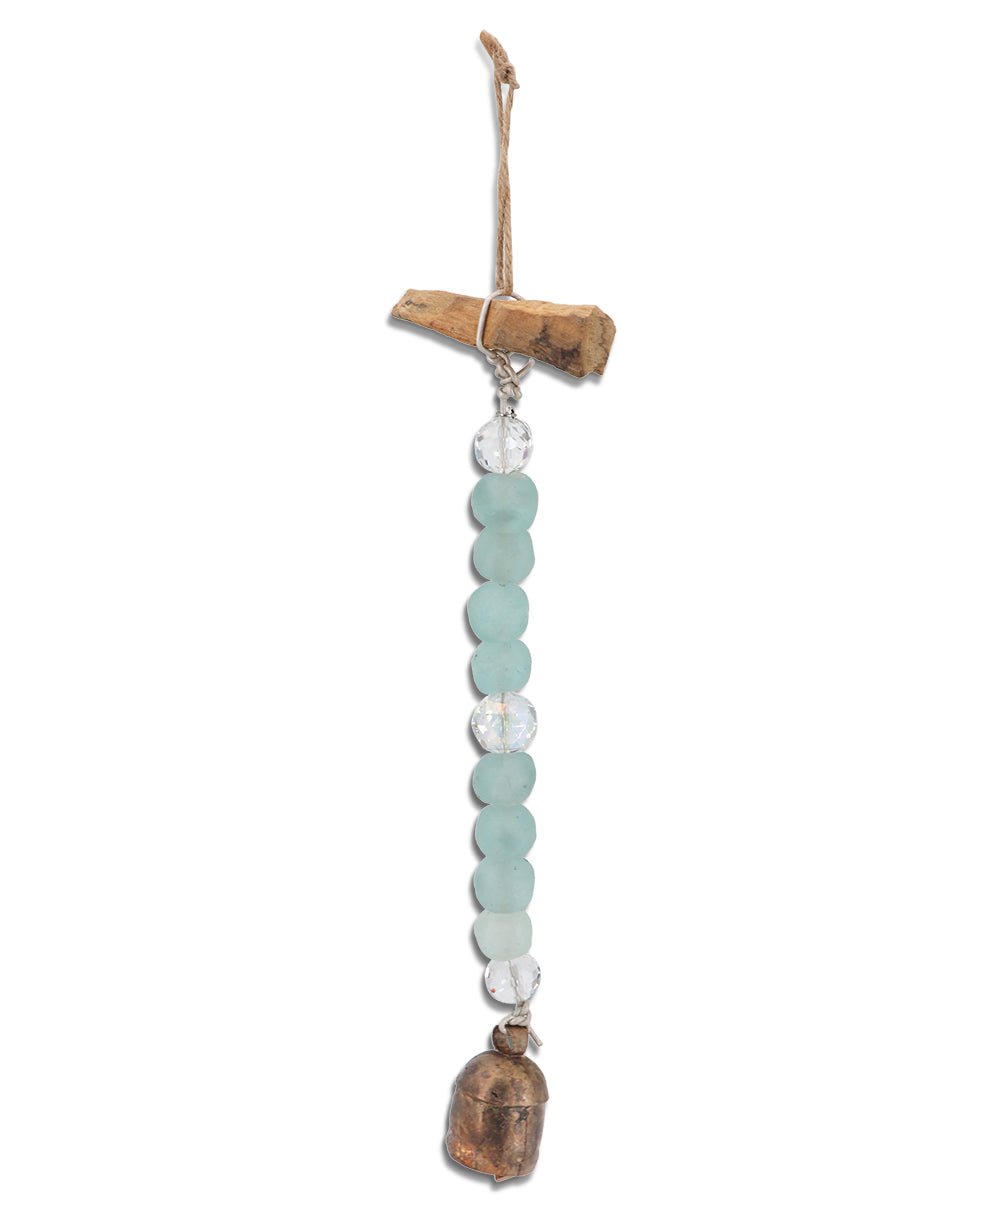 Palo Santo Wood Recycled Glass Beads with Traditional Nana Bell Hanging Chime - Wind Chimes Aqua